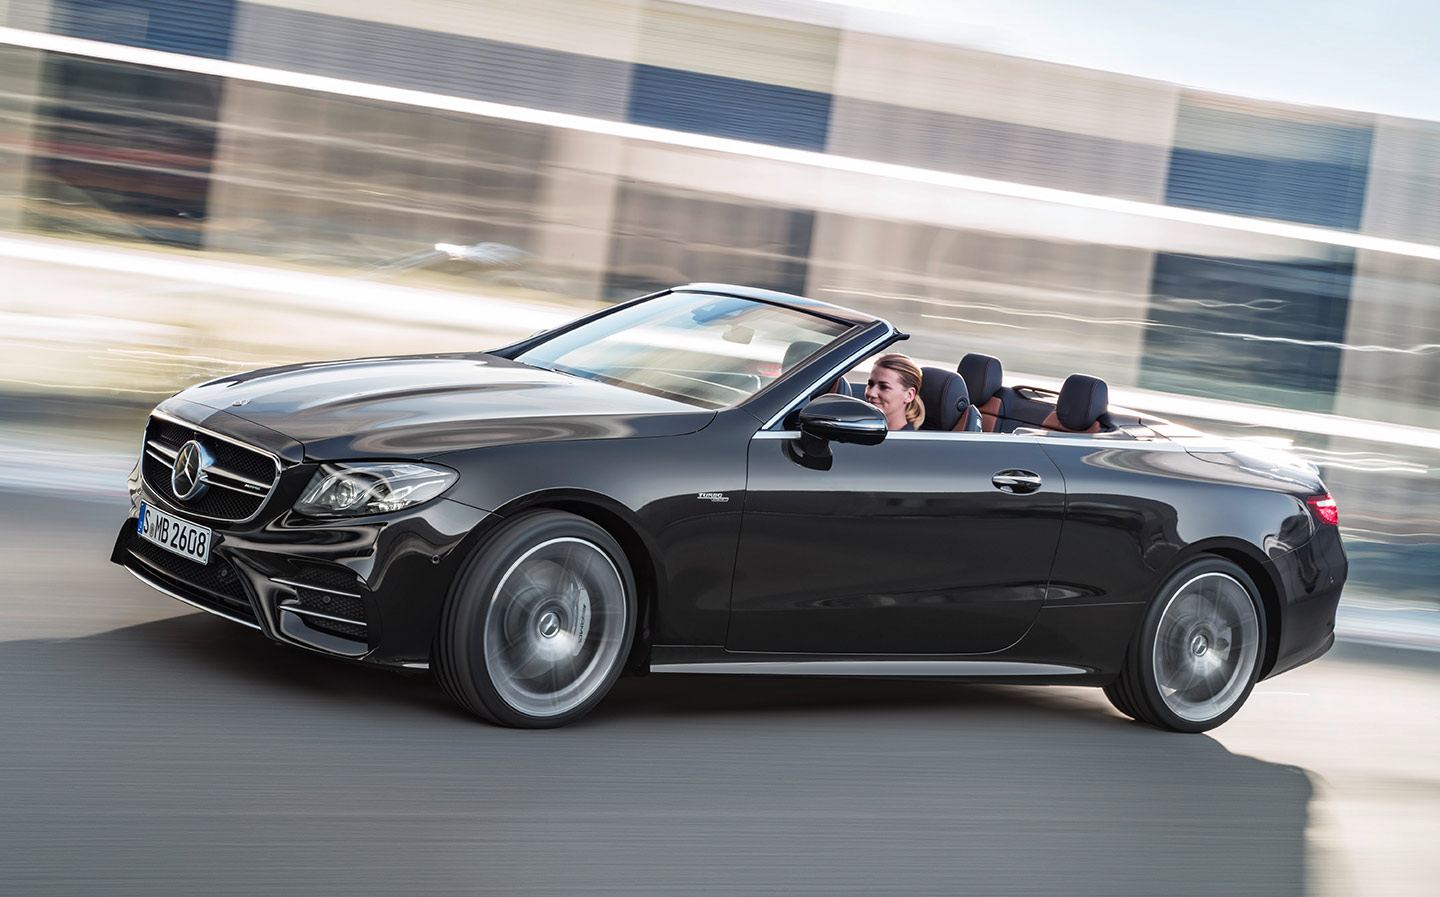 2019 Mercedes-AMG E 53 Cabriolet at the 2018 Detroit Motor show